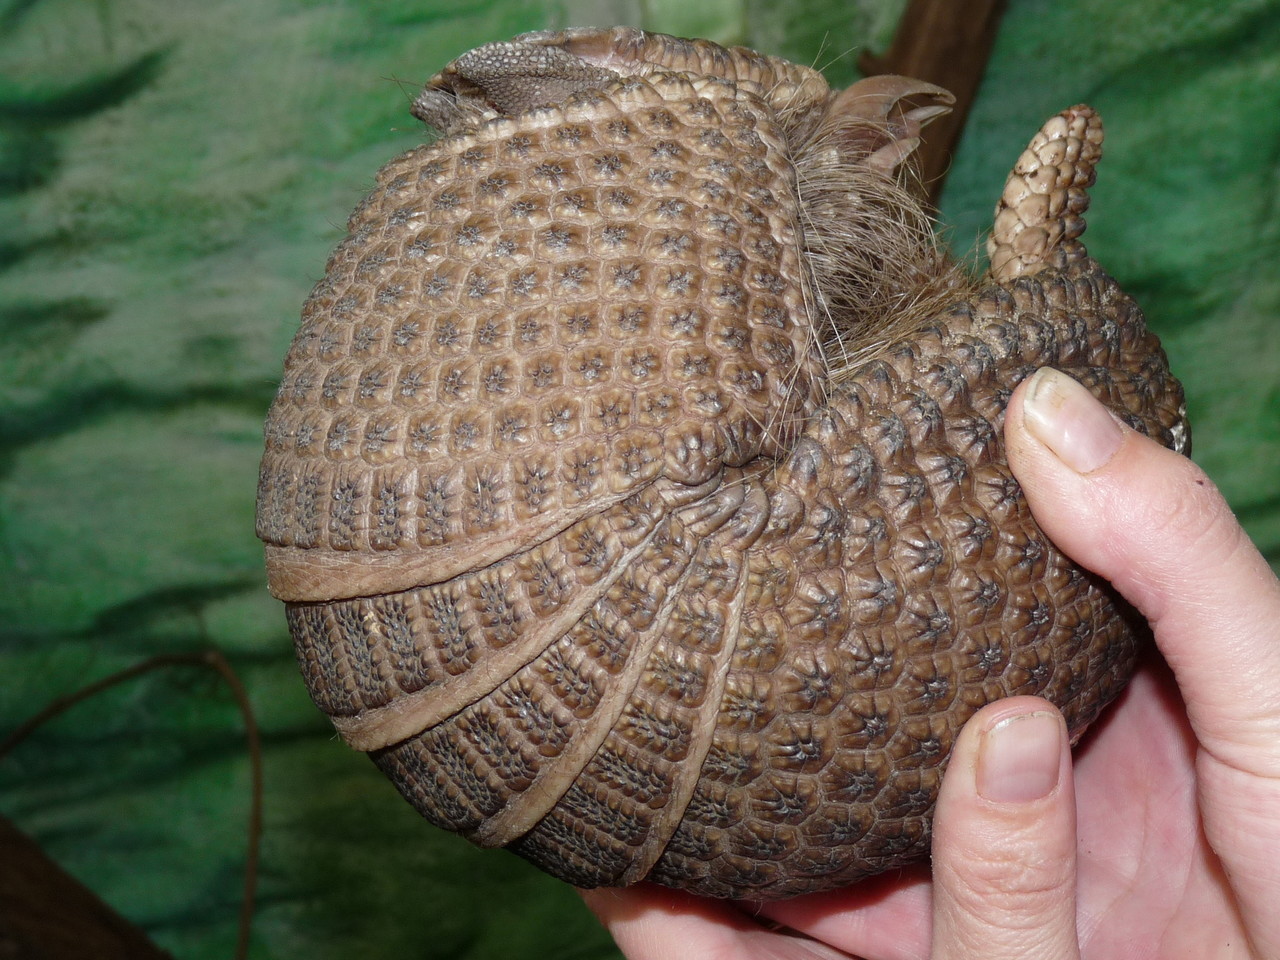 Southern three-banded armadillo Tolypeutes matacus